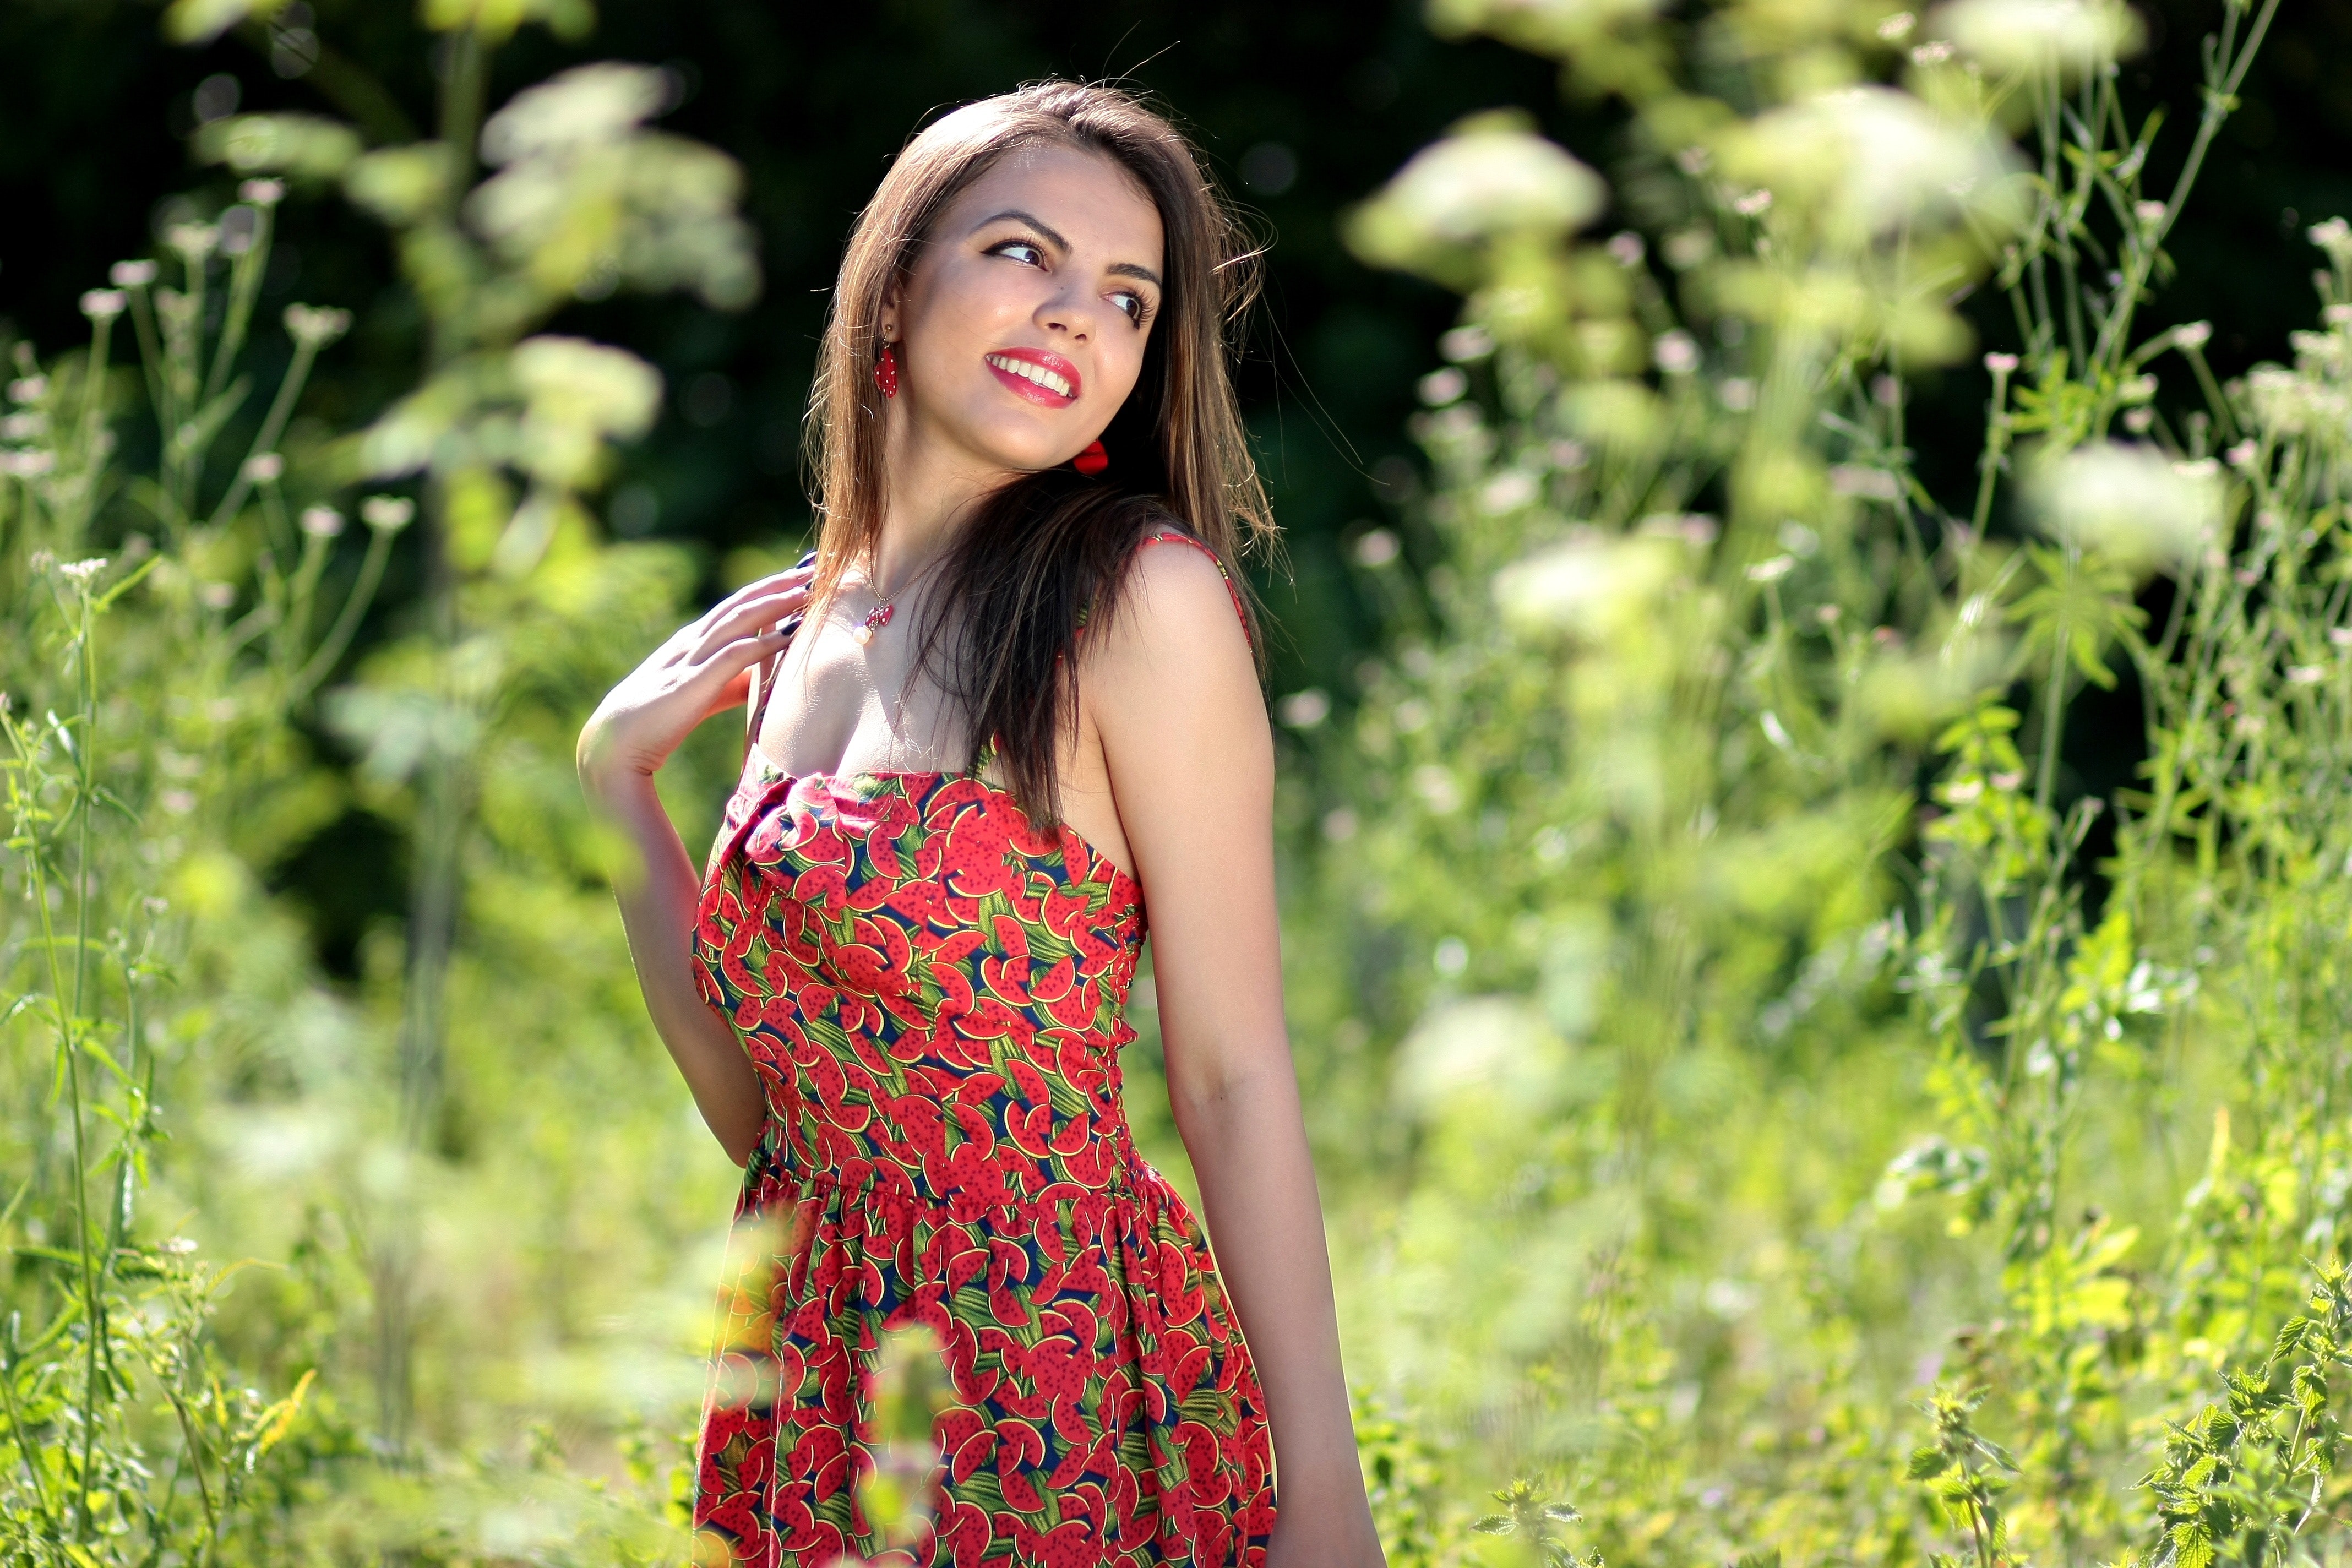 Smiling woman in pink black and green floral tube dress near green leaf plants during daytime photo